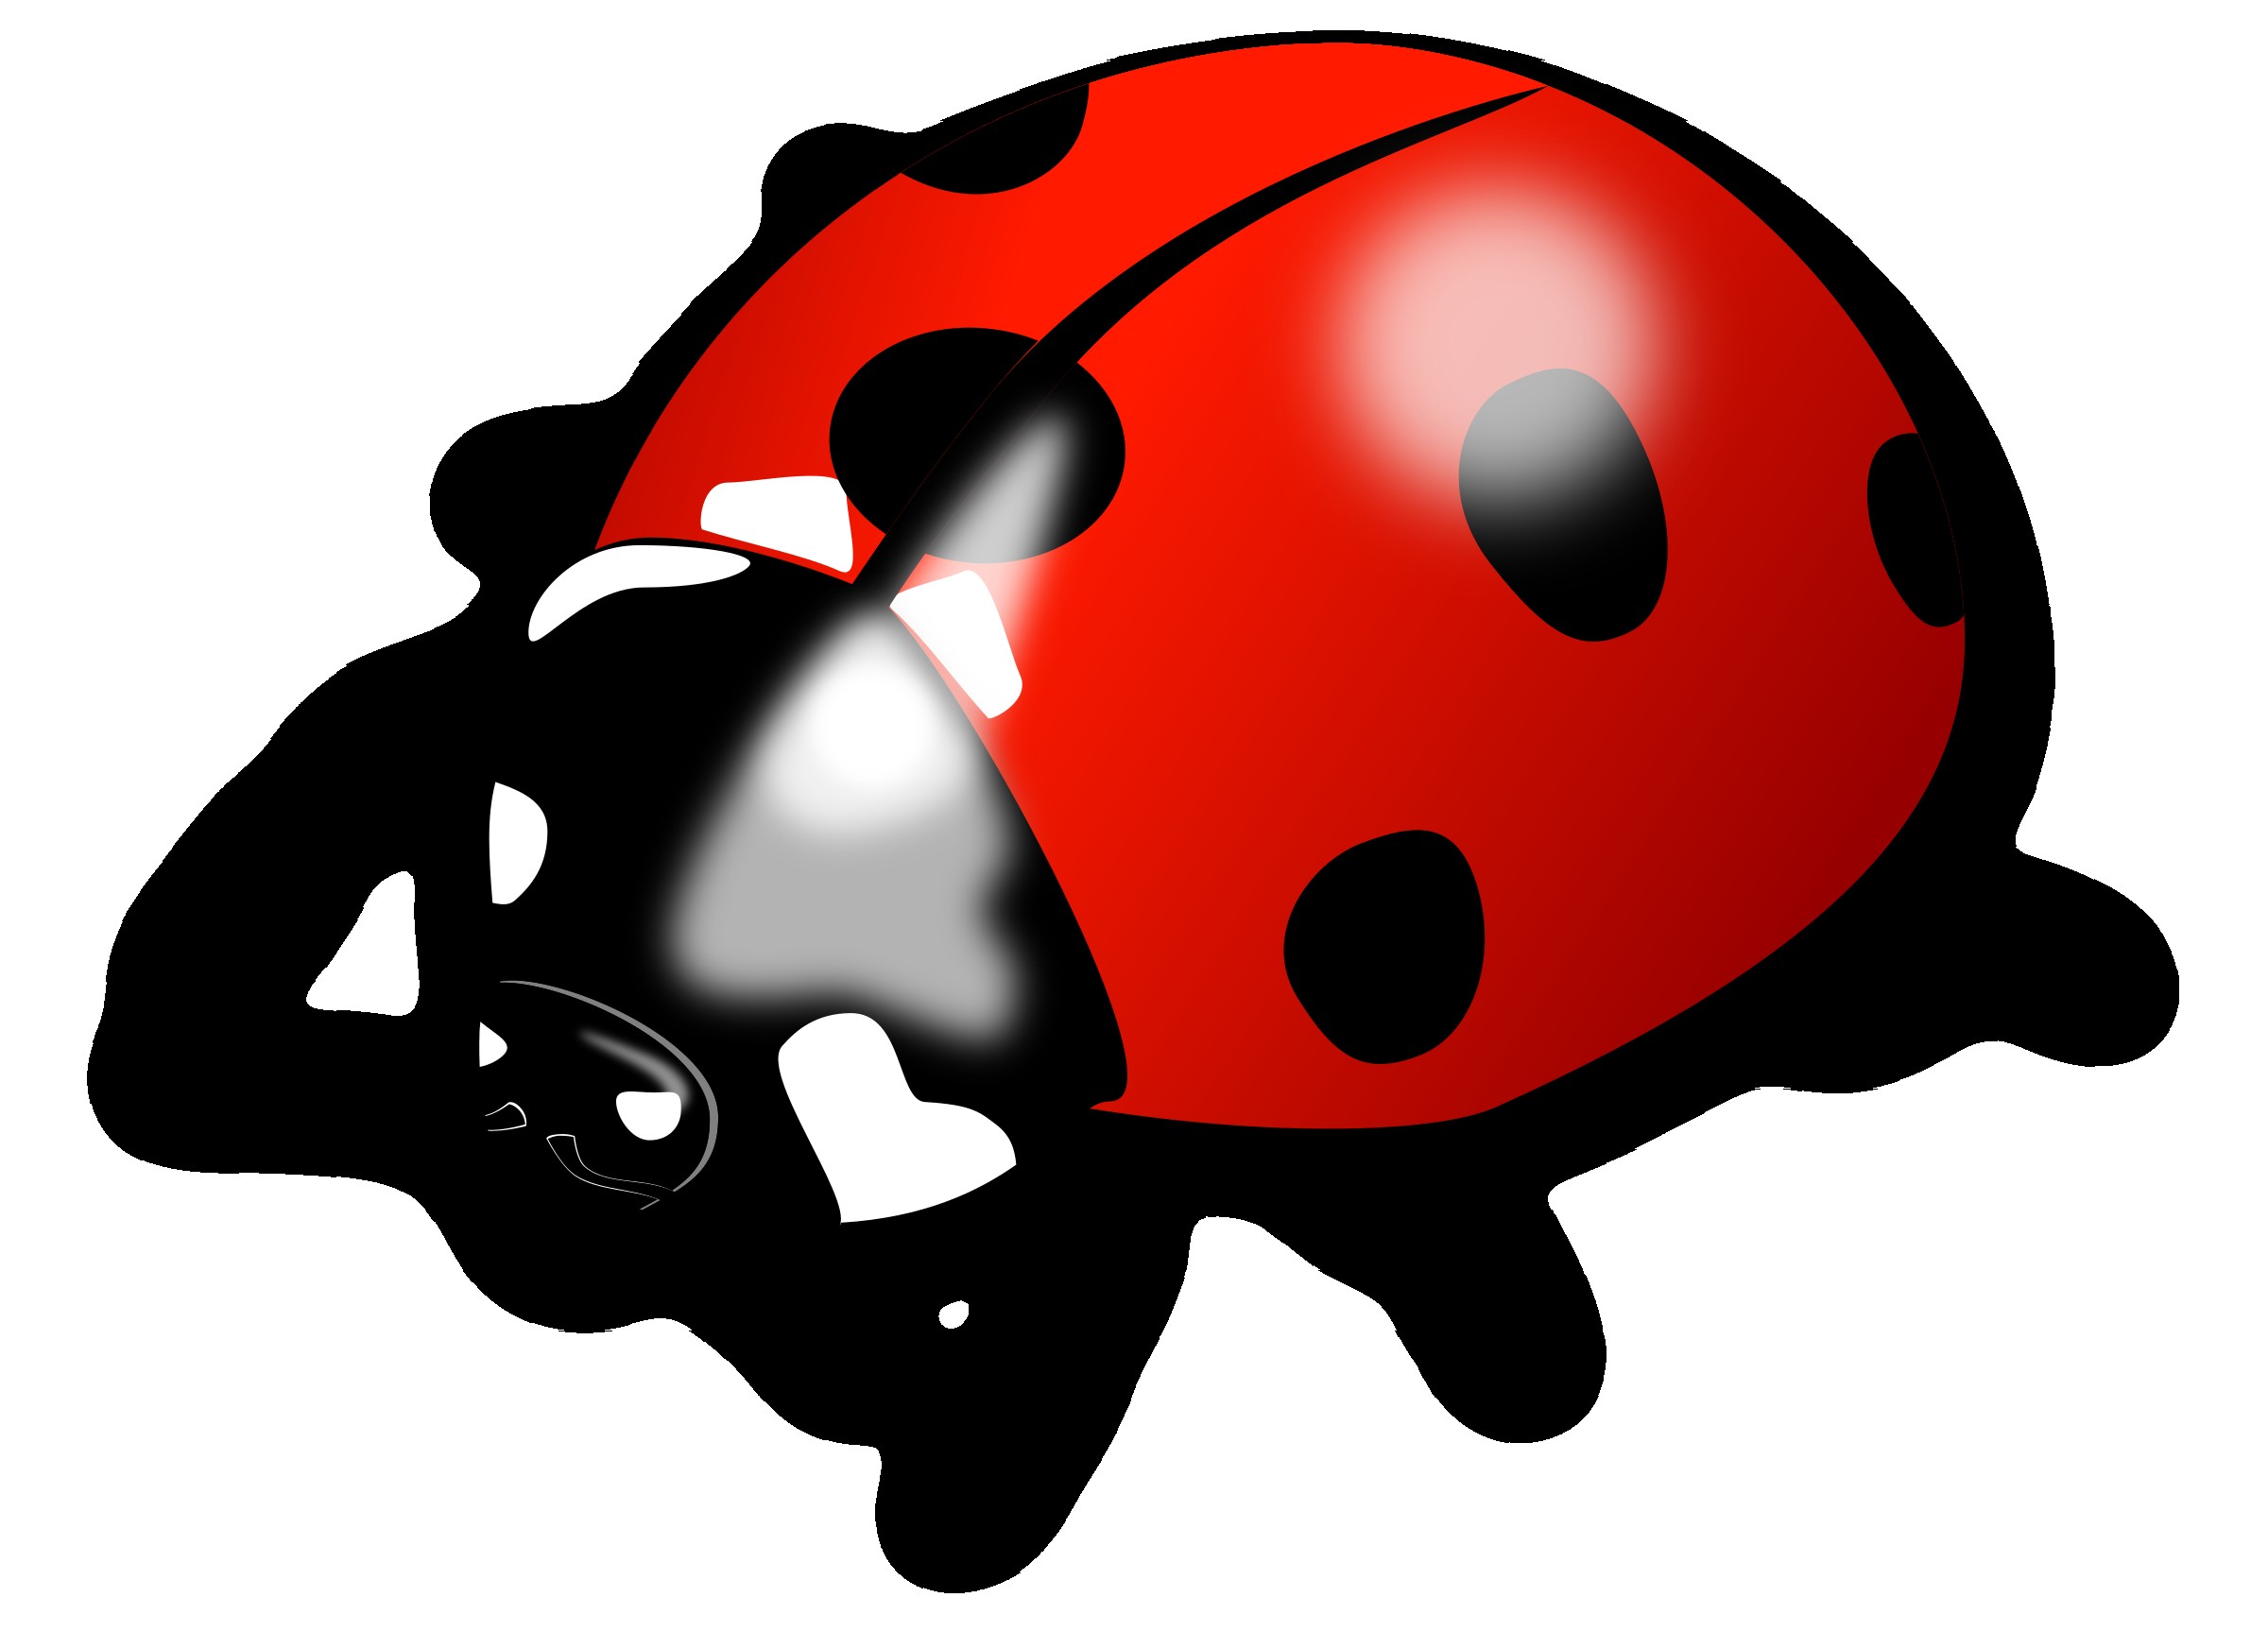 Ladybug Cartoon Drawing | Free download on ClipArtMag